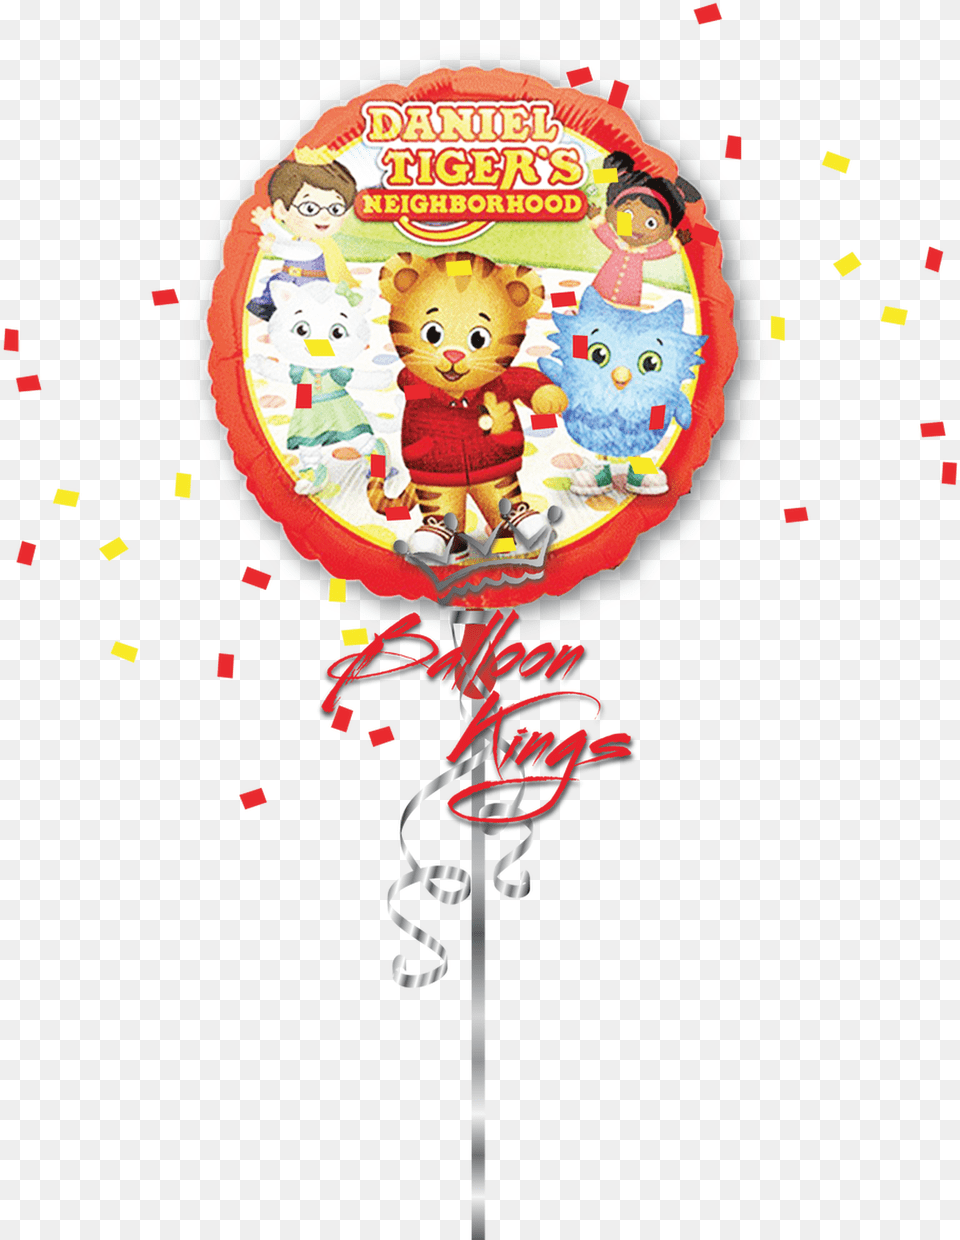 Daniel Tiger S Neighborhood Daniel Tiger Balloons, Food, Sweets, Candy, Toy Free Png